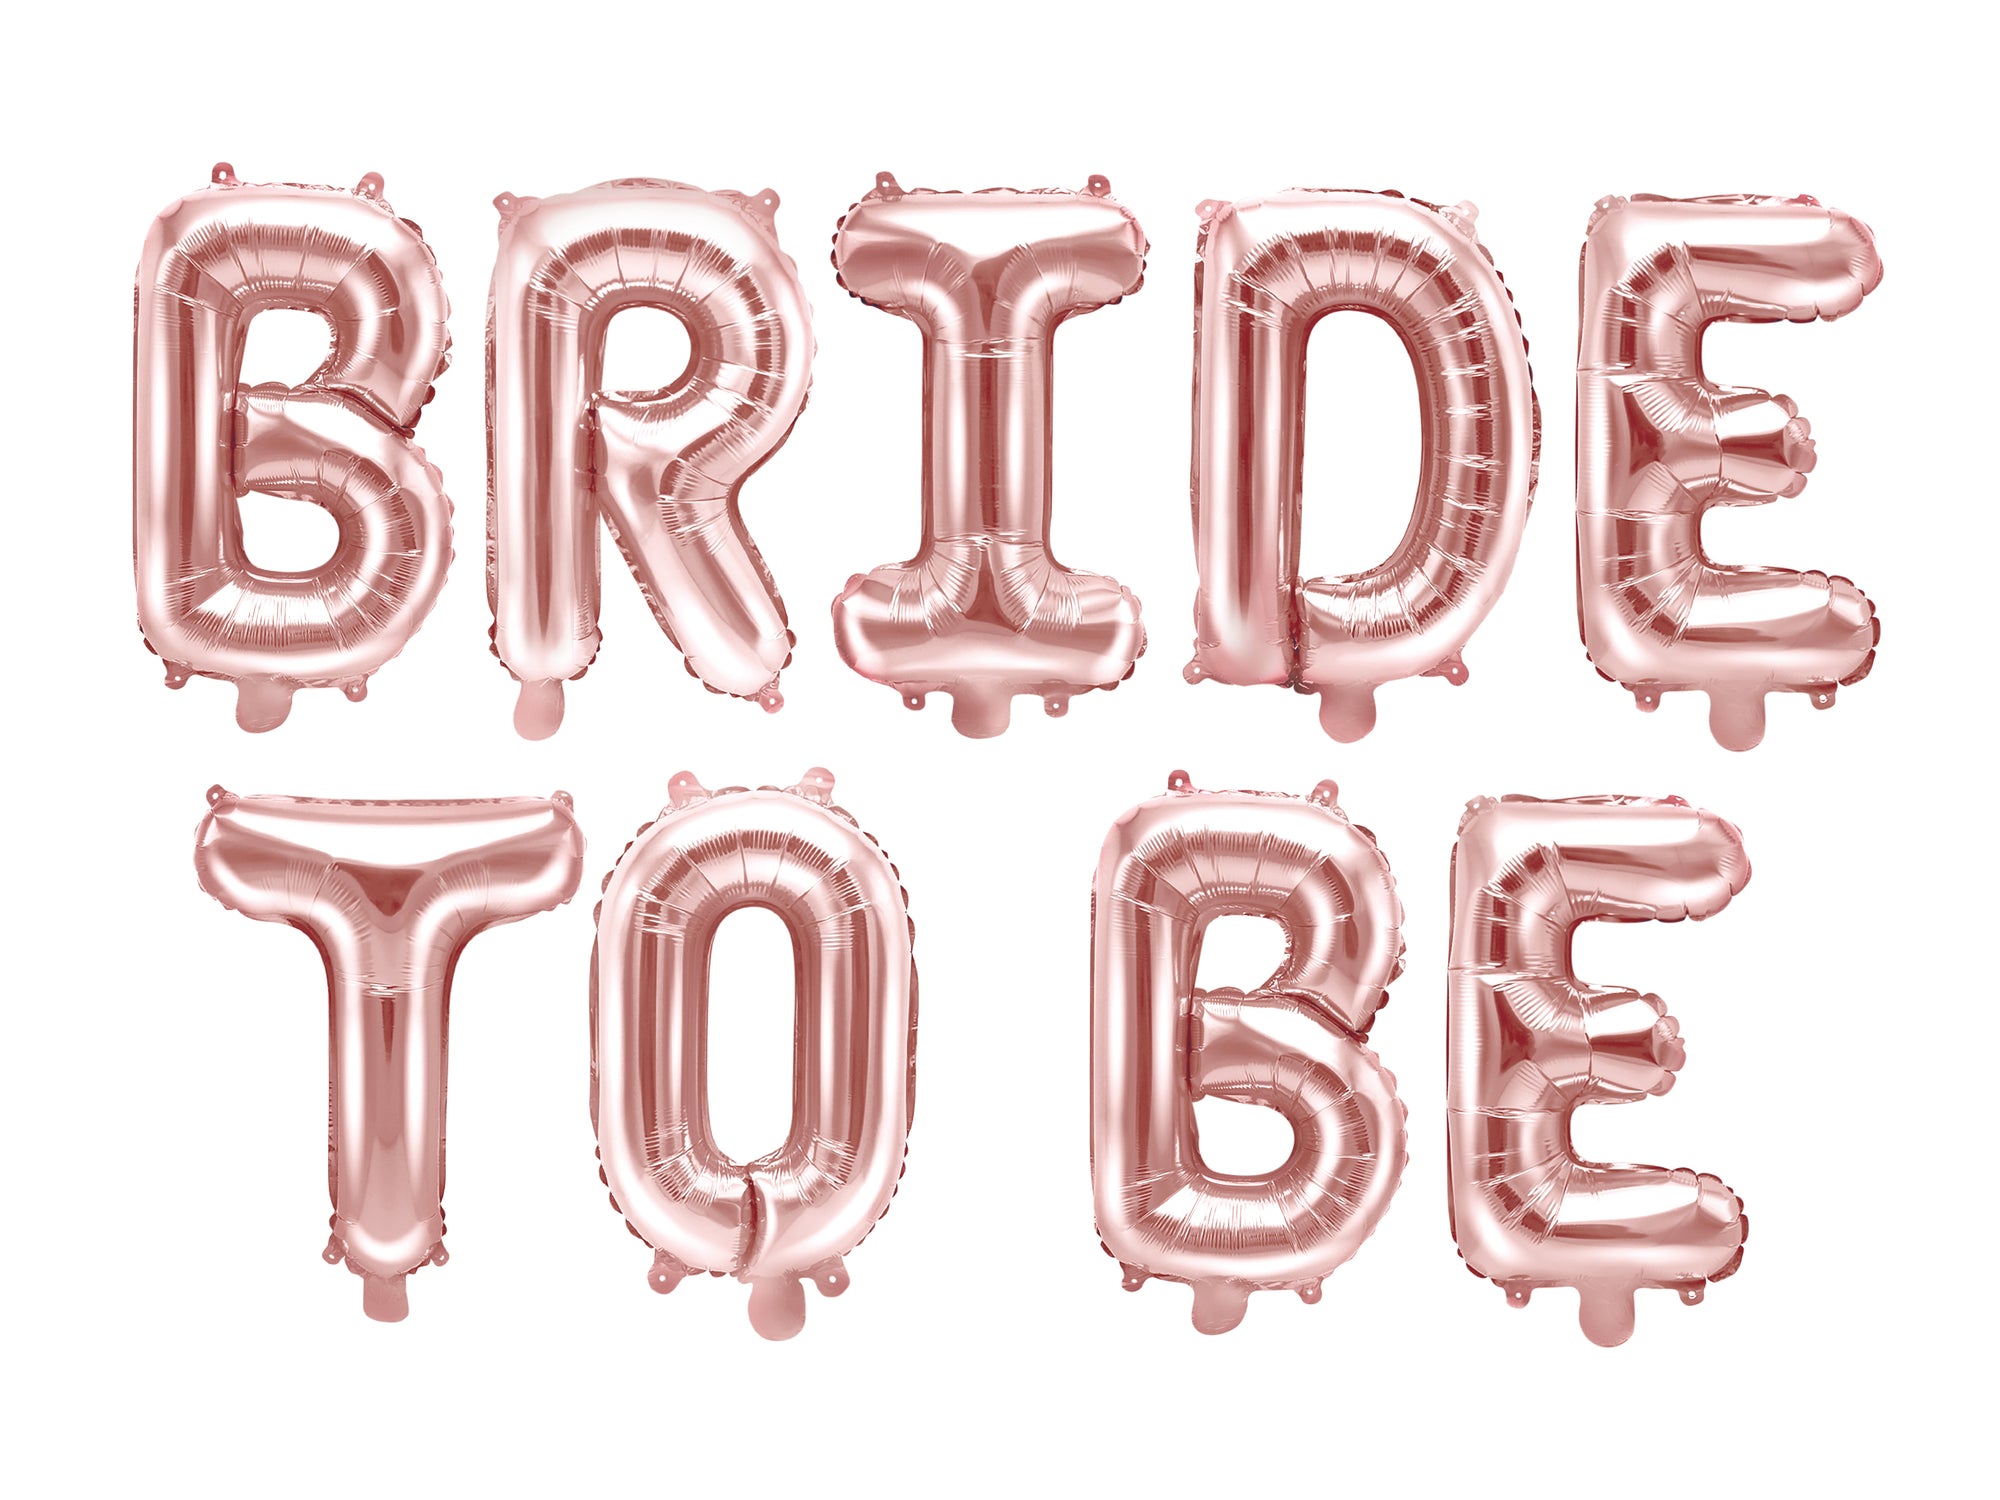 'Bride To Be' Metallic Balloon Letters